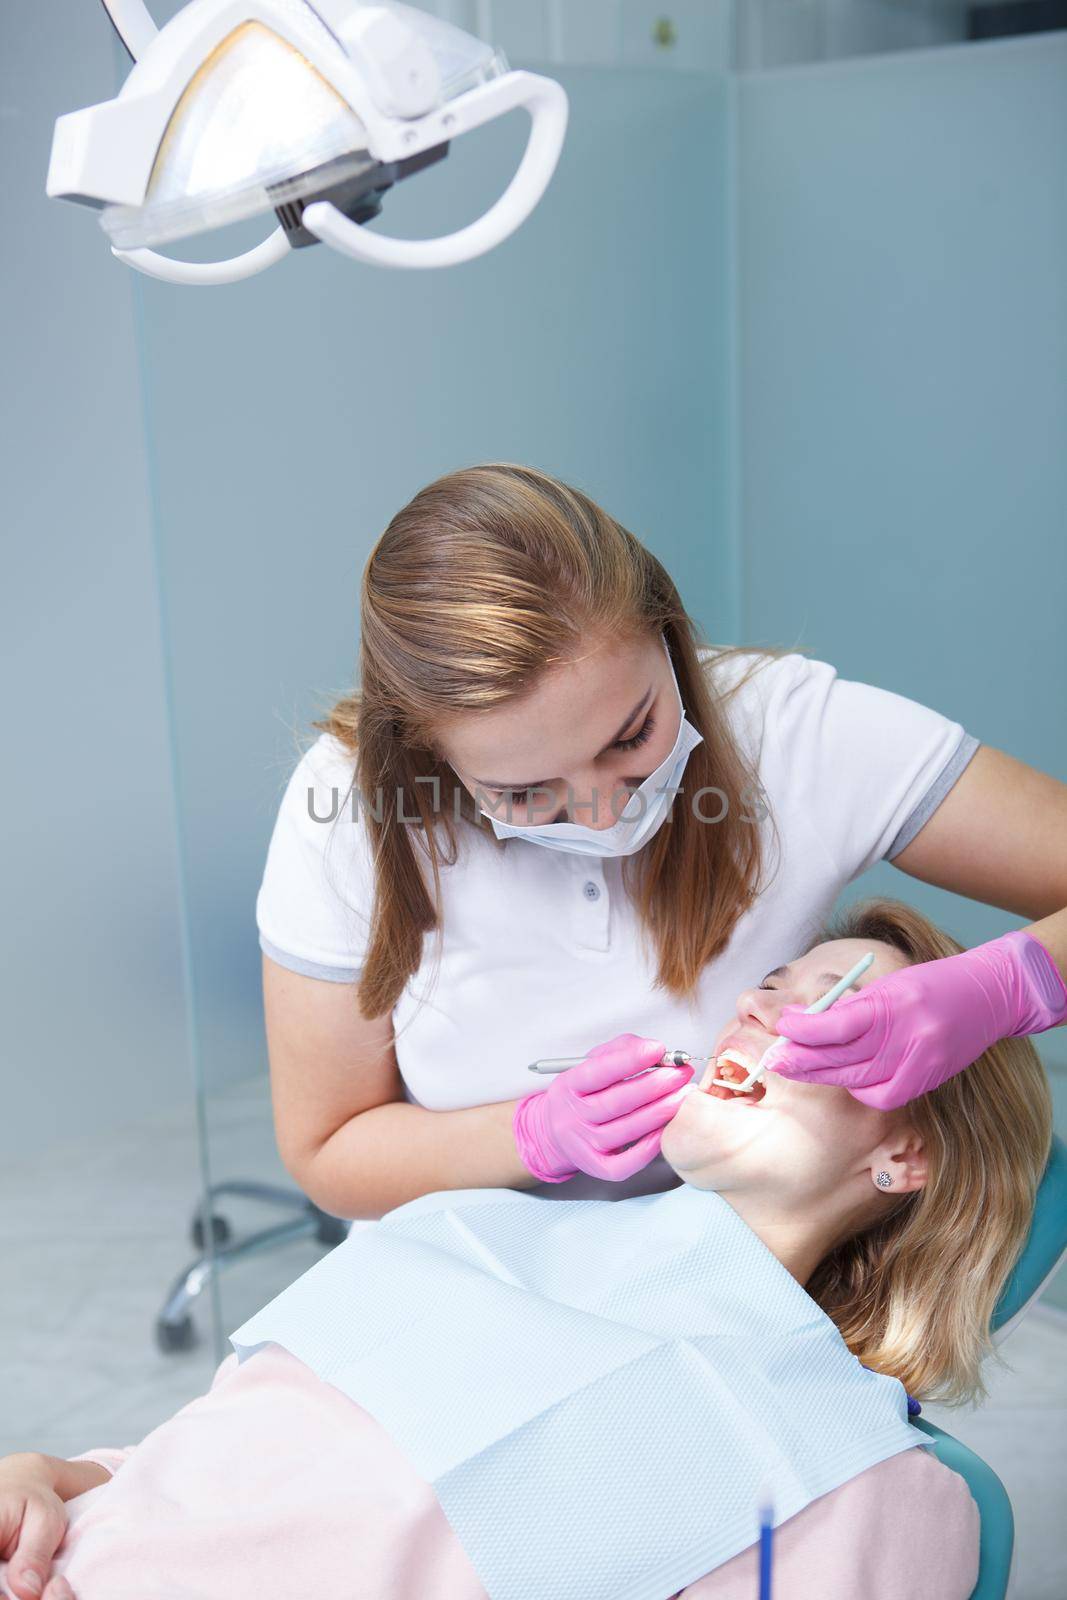 Vertical shot of a professional dentist examining teeth of female patient